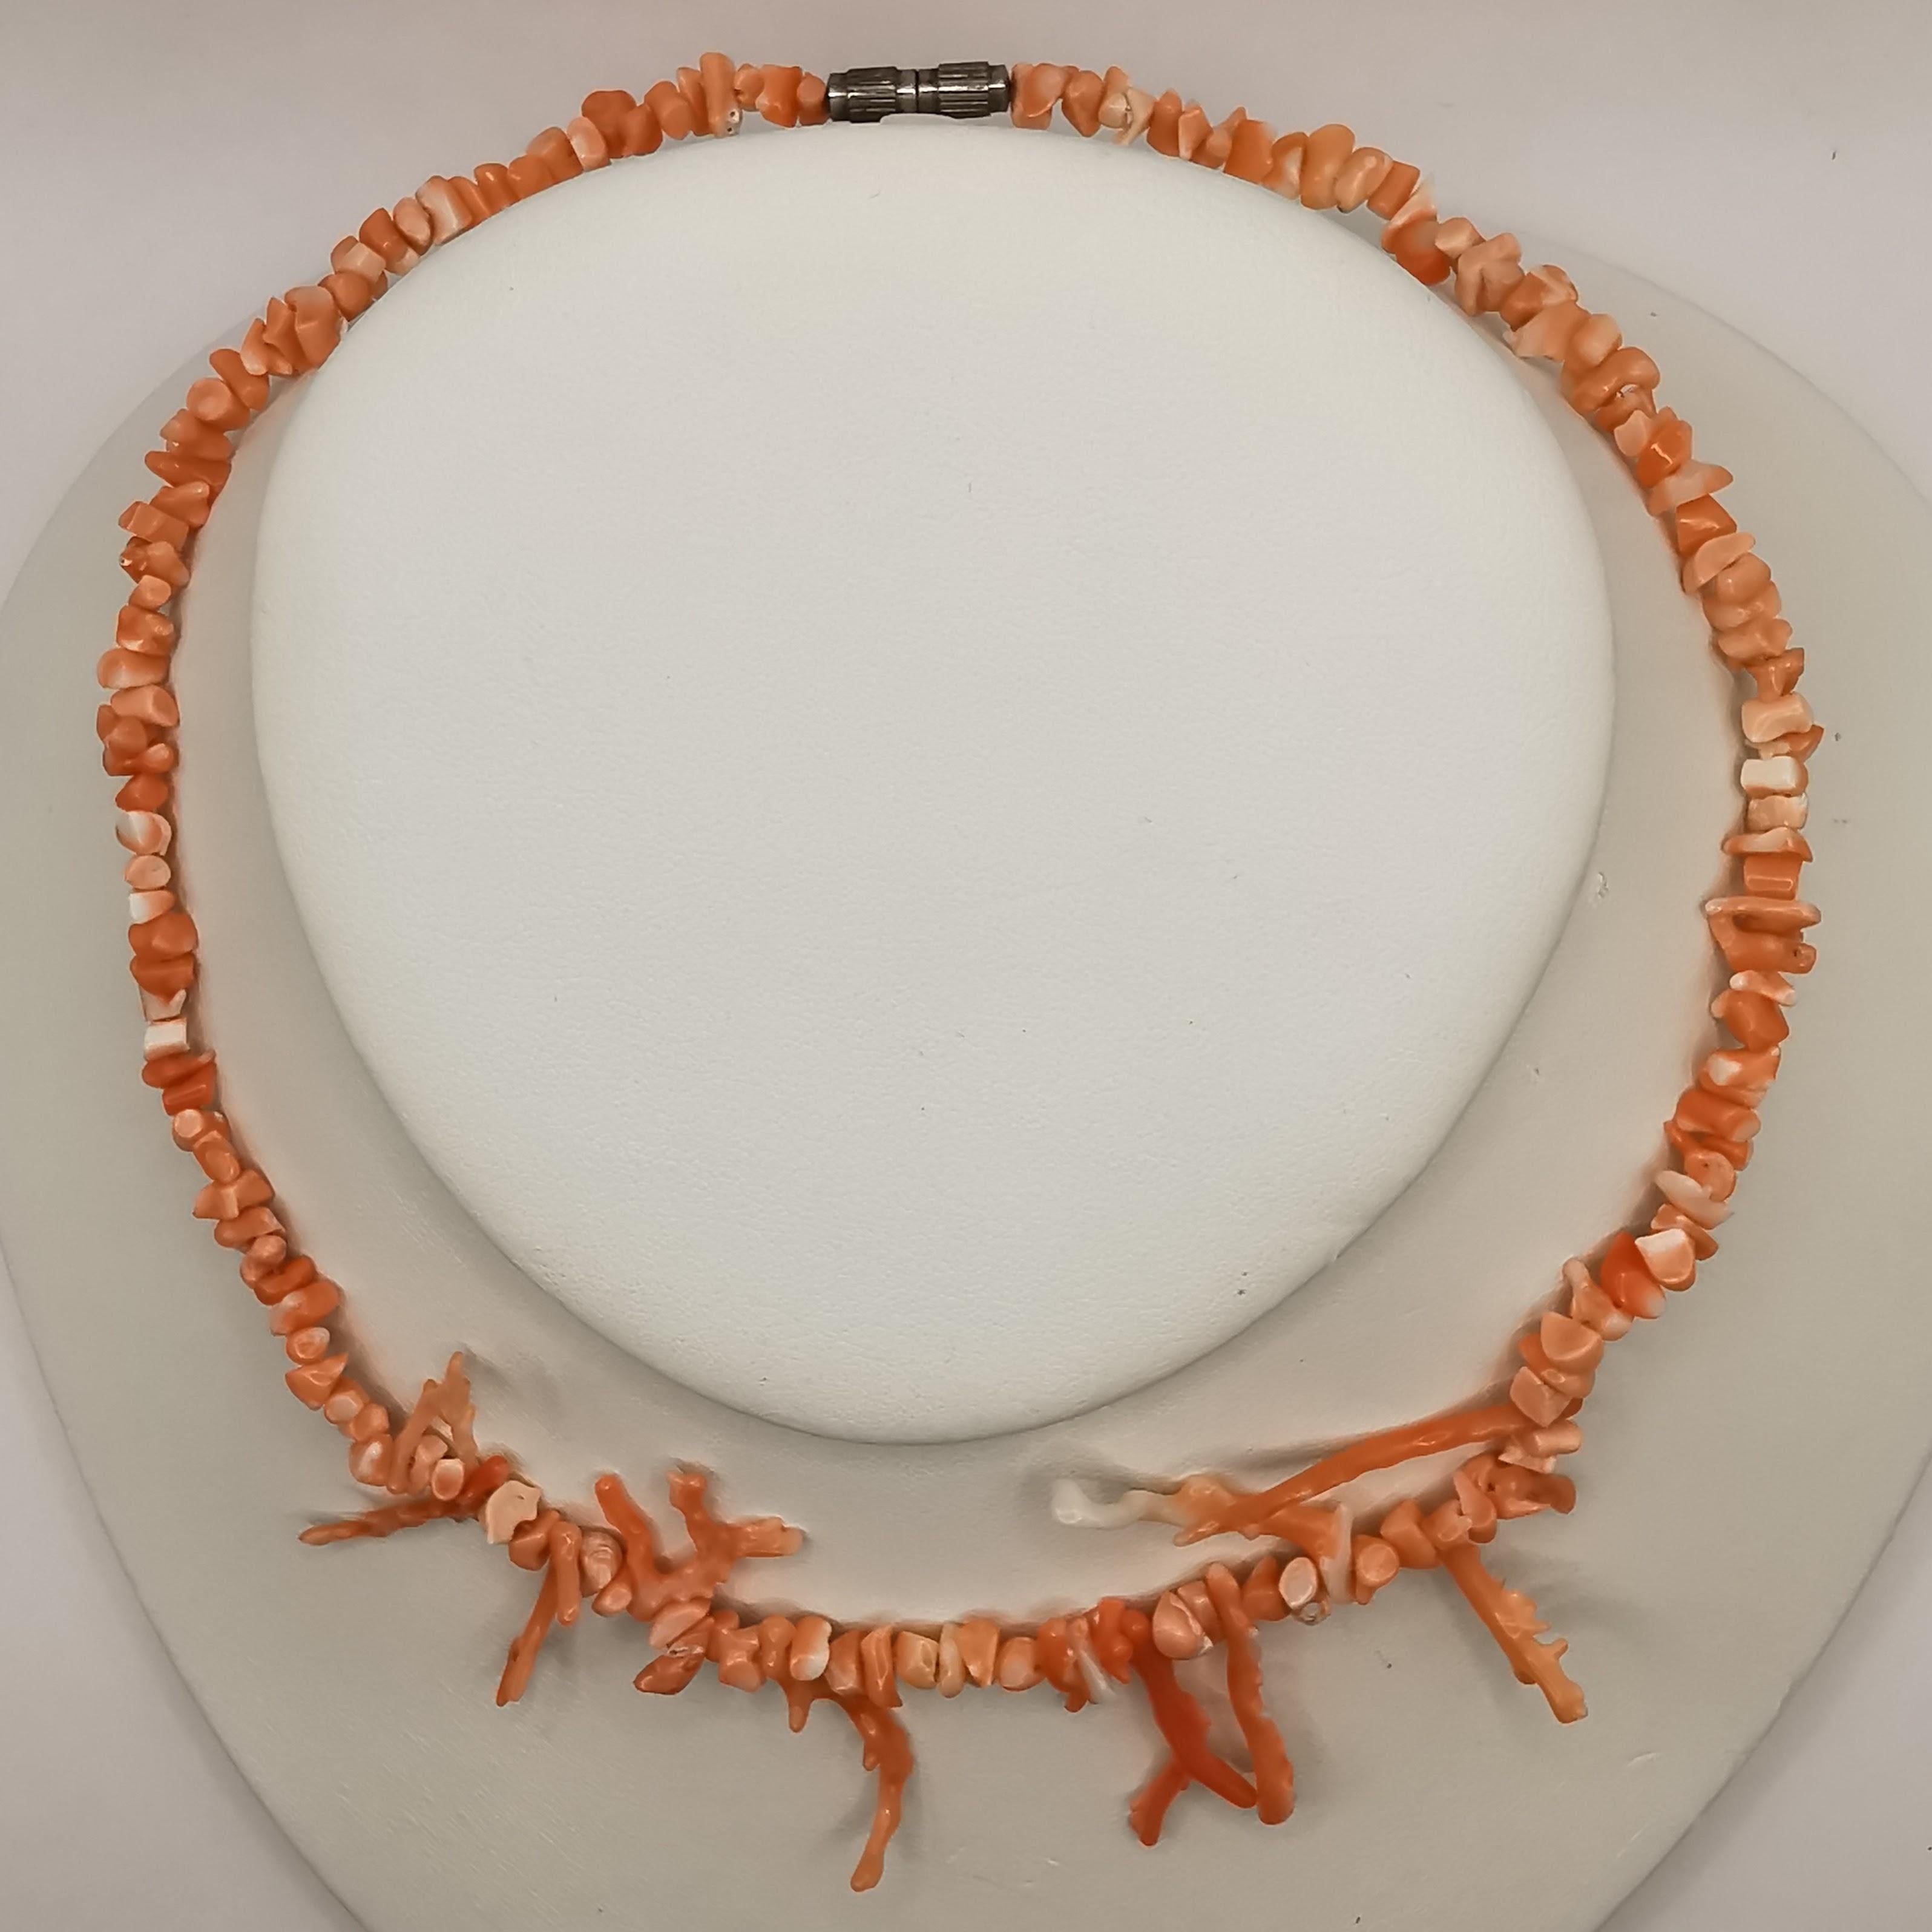 This beautiful natural pink salmon coral necklace is a unique and eye-catching piece that is sure to make a statement. The necklace features a strand of elegant coral beads, each with a unique and organic shape that adds to the necklace's charm. The